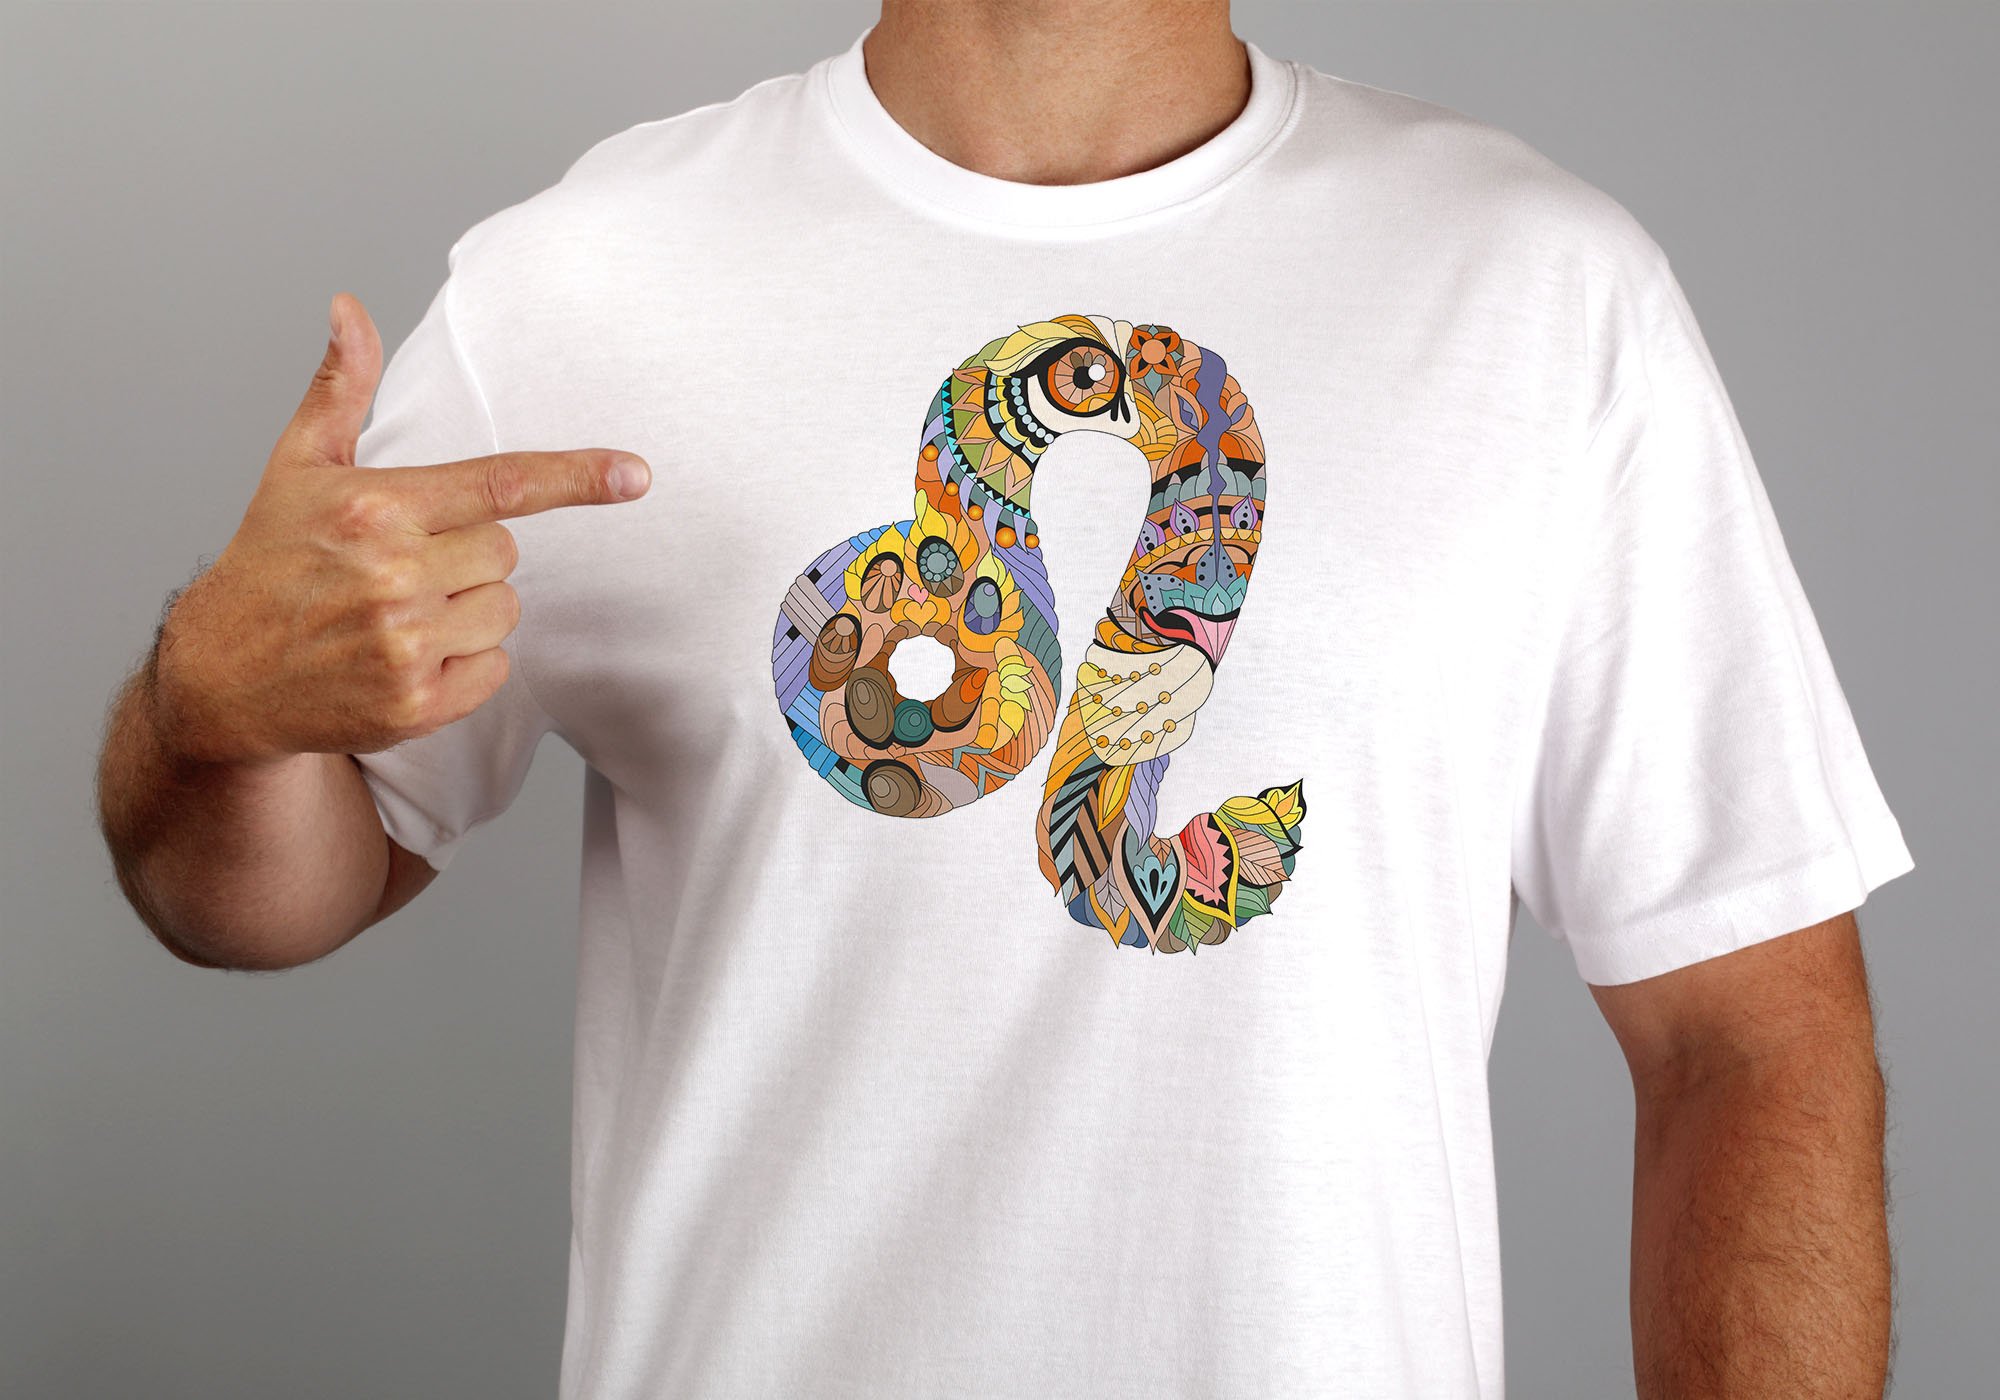 Classic white t-shirt with the ornamental zodiac sign.